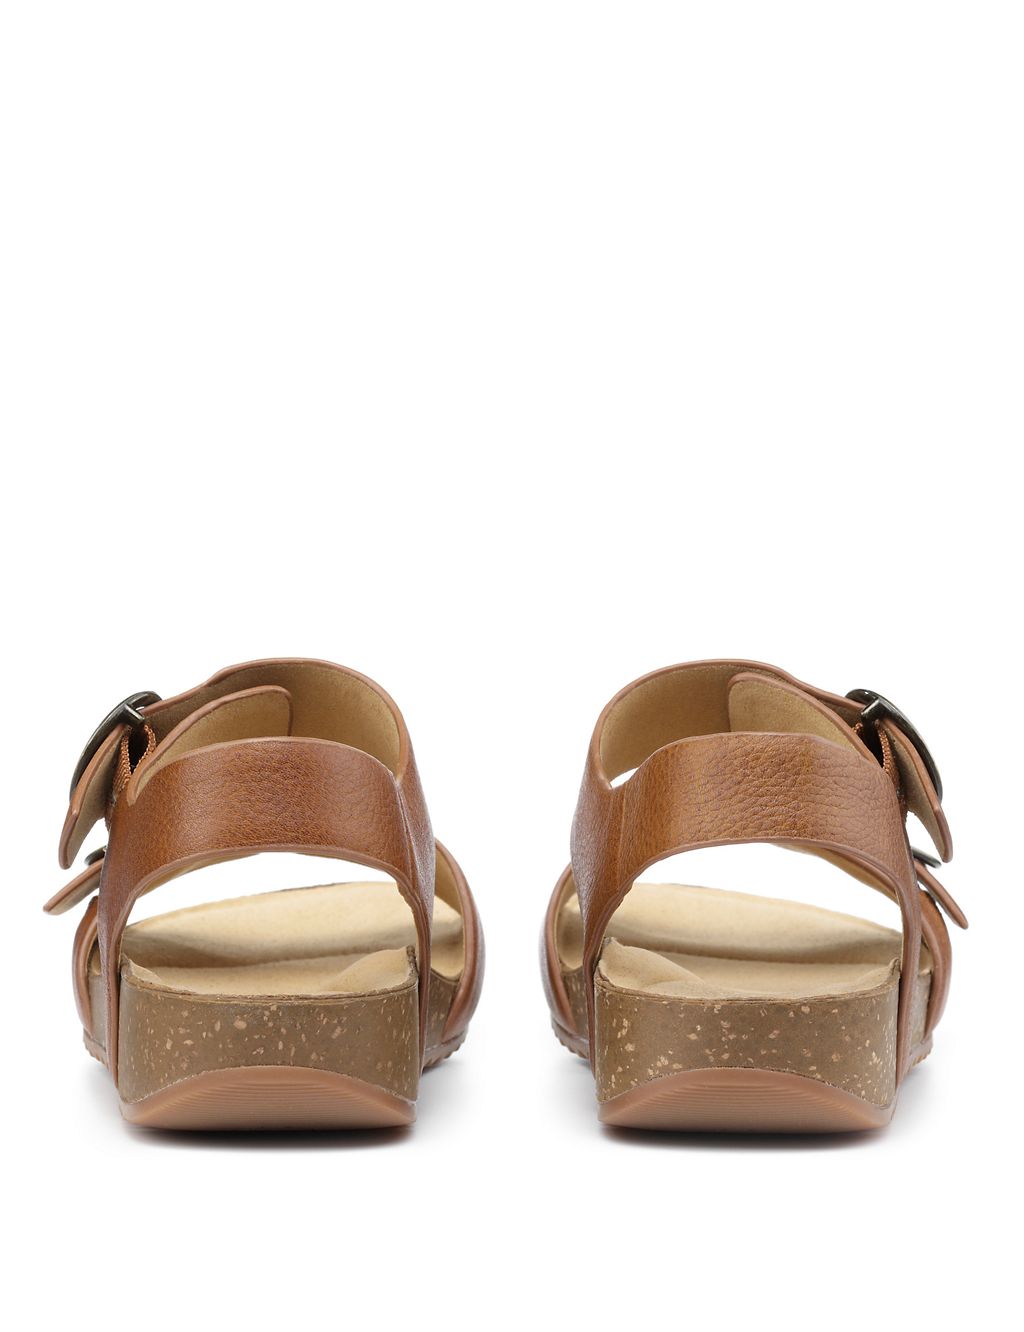 Tourist Leather Ankle Strap Wedge Sandals | Hotter | M&S